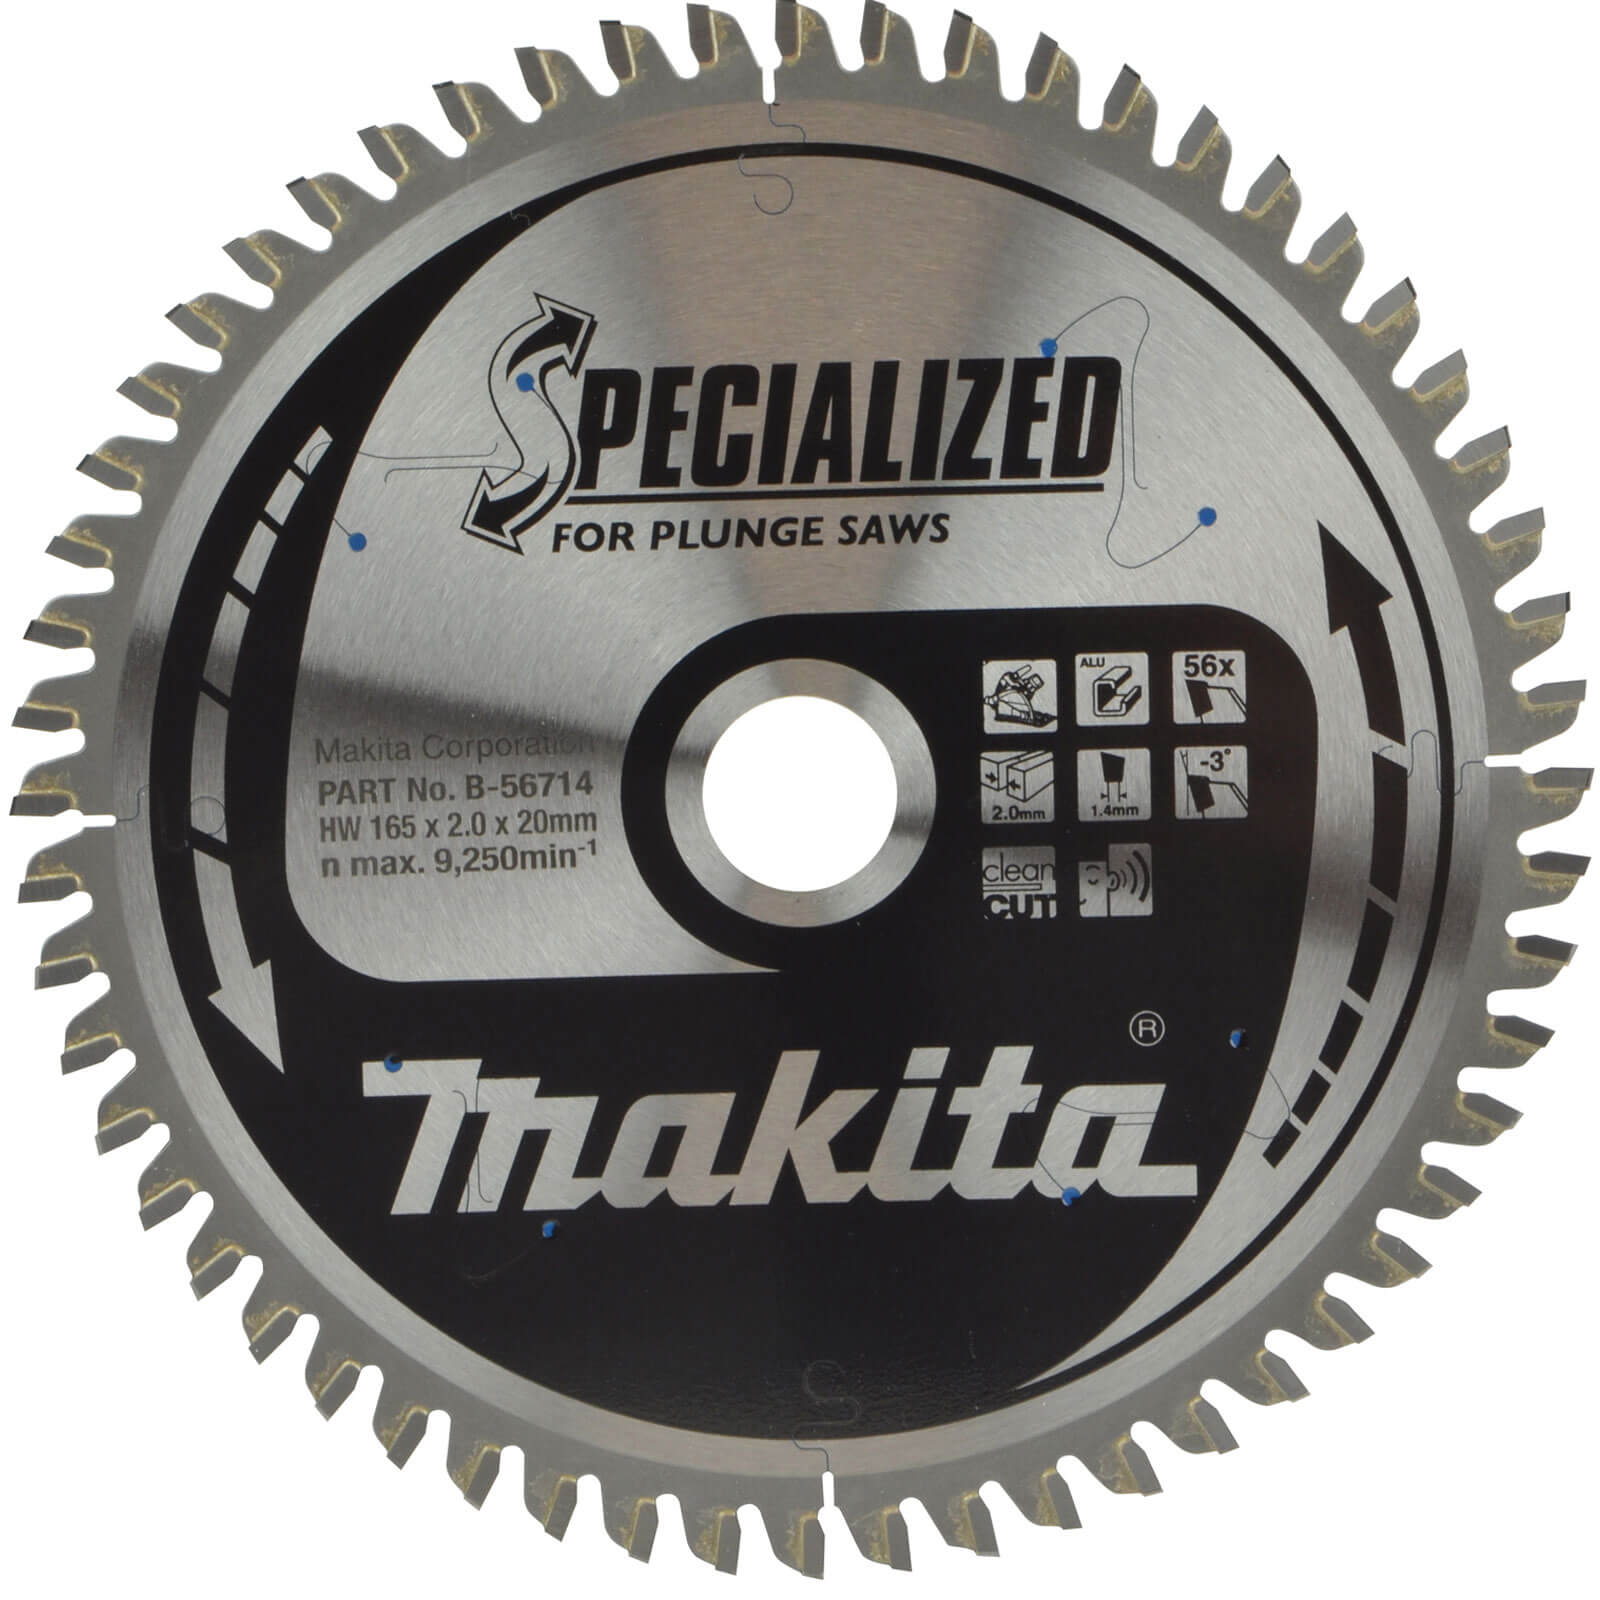 Makita SPECIALIZED Plunge Saw Aluminium Cutting Saw Blade 165mm 56T 20mm